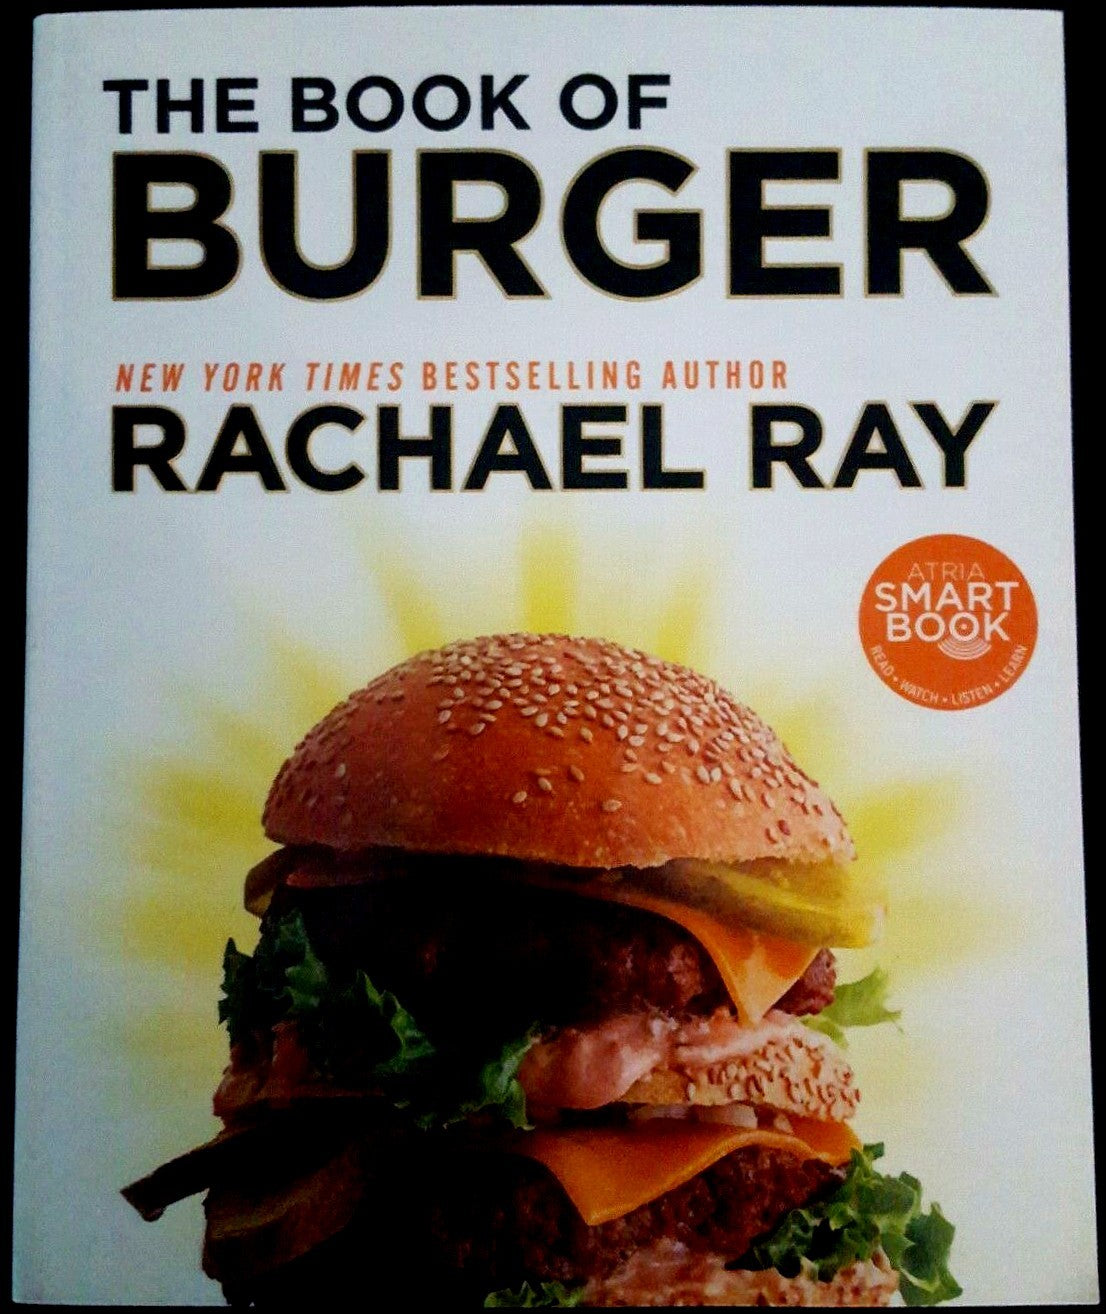 Rachael Ray autographed The Book of Burger paperback cookbook inscribed Yum-o!